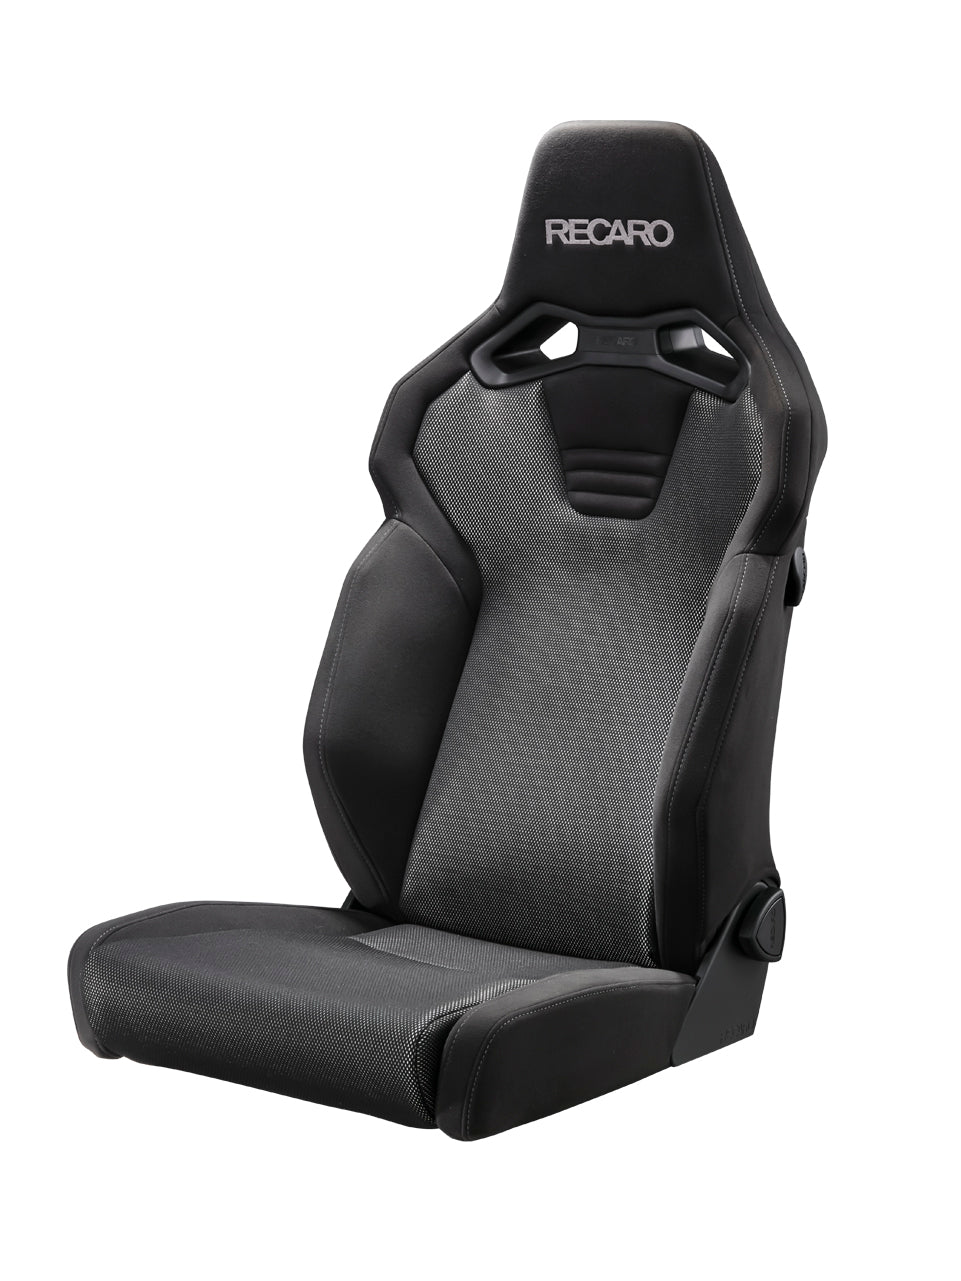 RECARO SR-C BK100H A R SL BK BRILLIANT MESH SILVER AND KAMUI BLACK COLOR SEAT ARMREST ATTACHEBLE WITH HEATED SEATS FOR  81-121.29.642-0